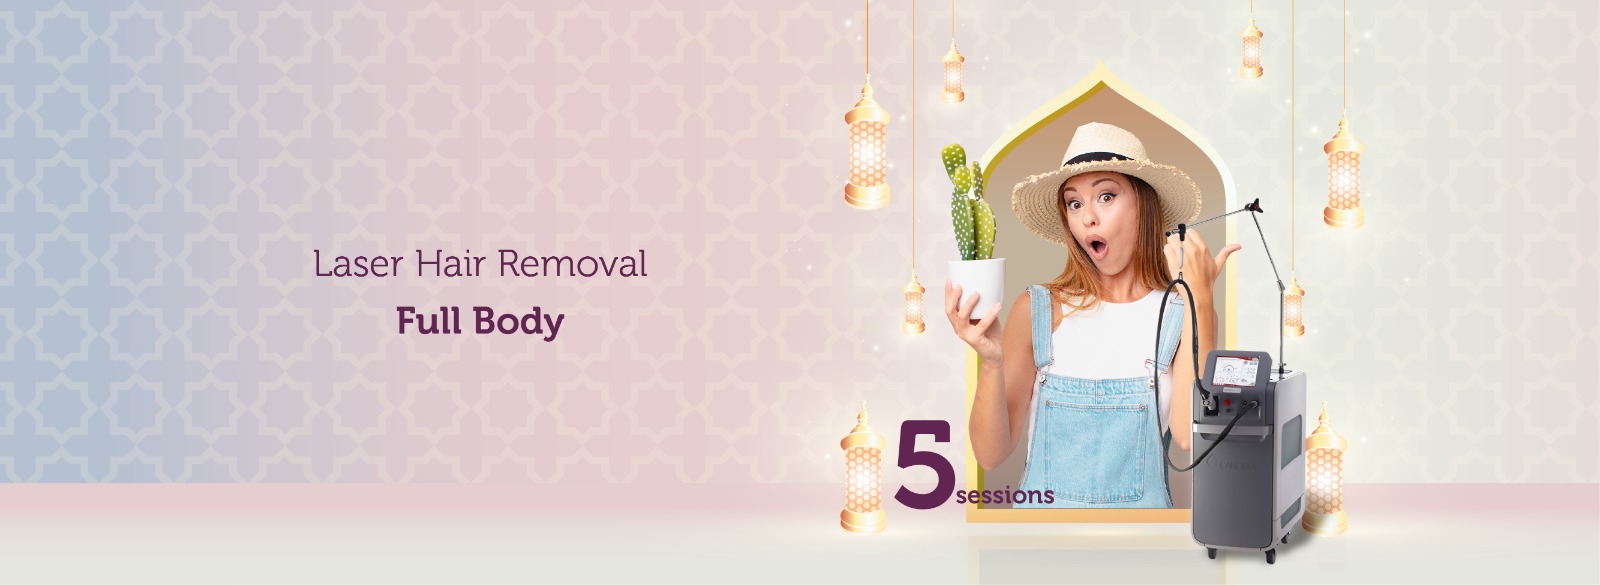 Laser Hair Removal Full body – AED 2,999